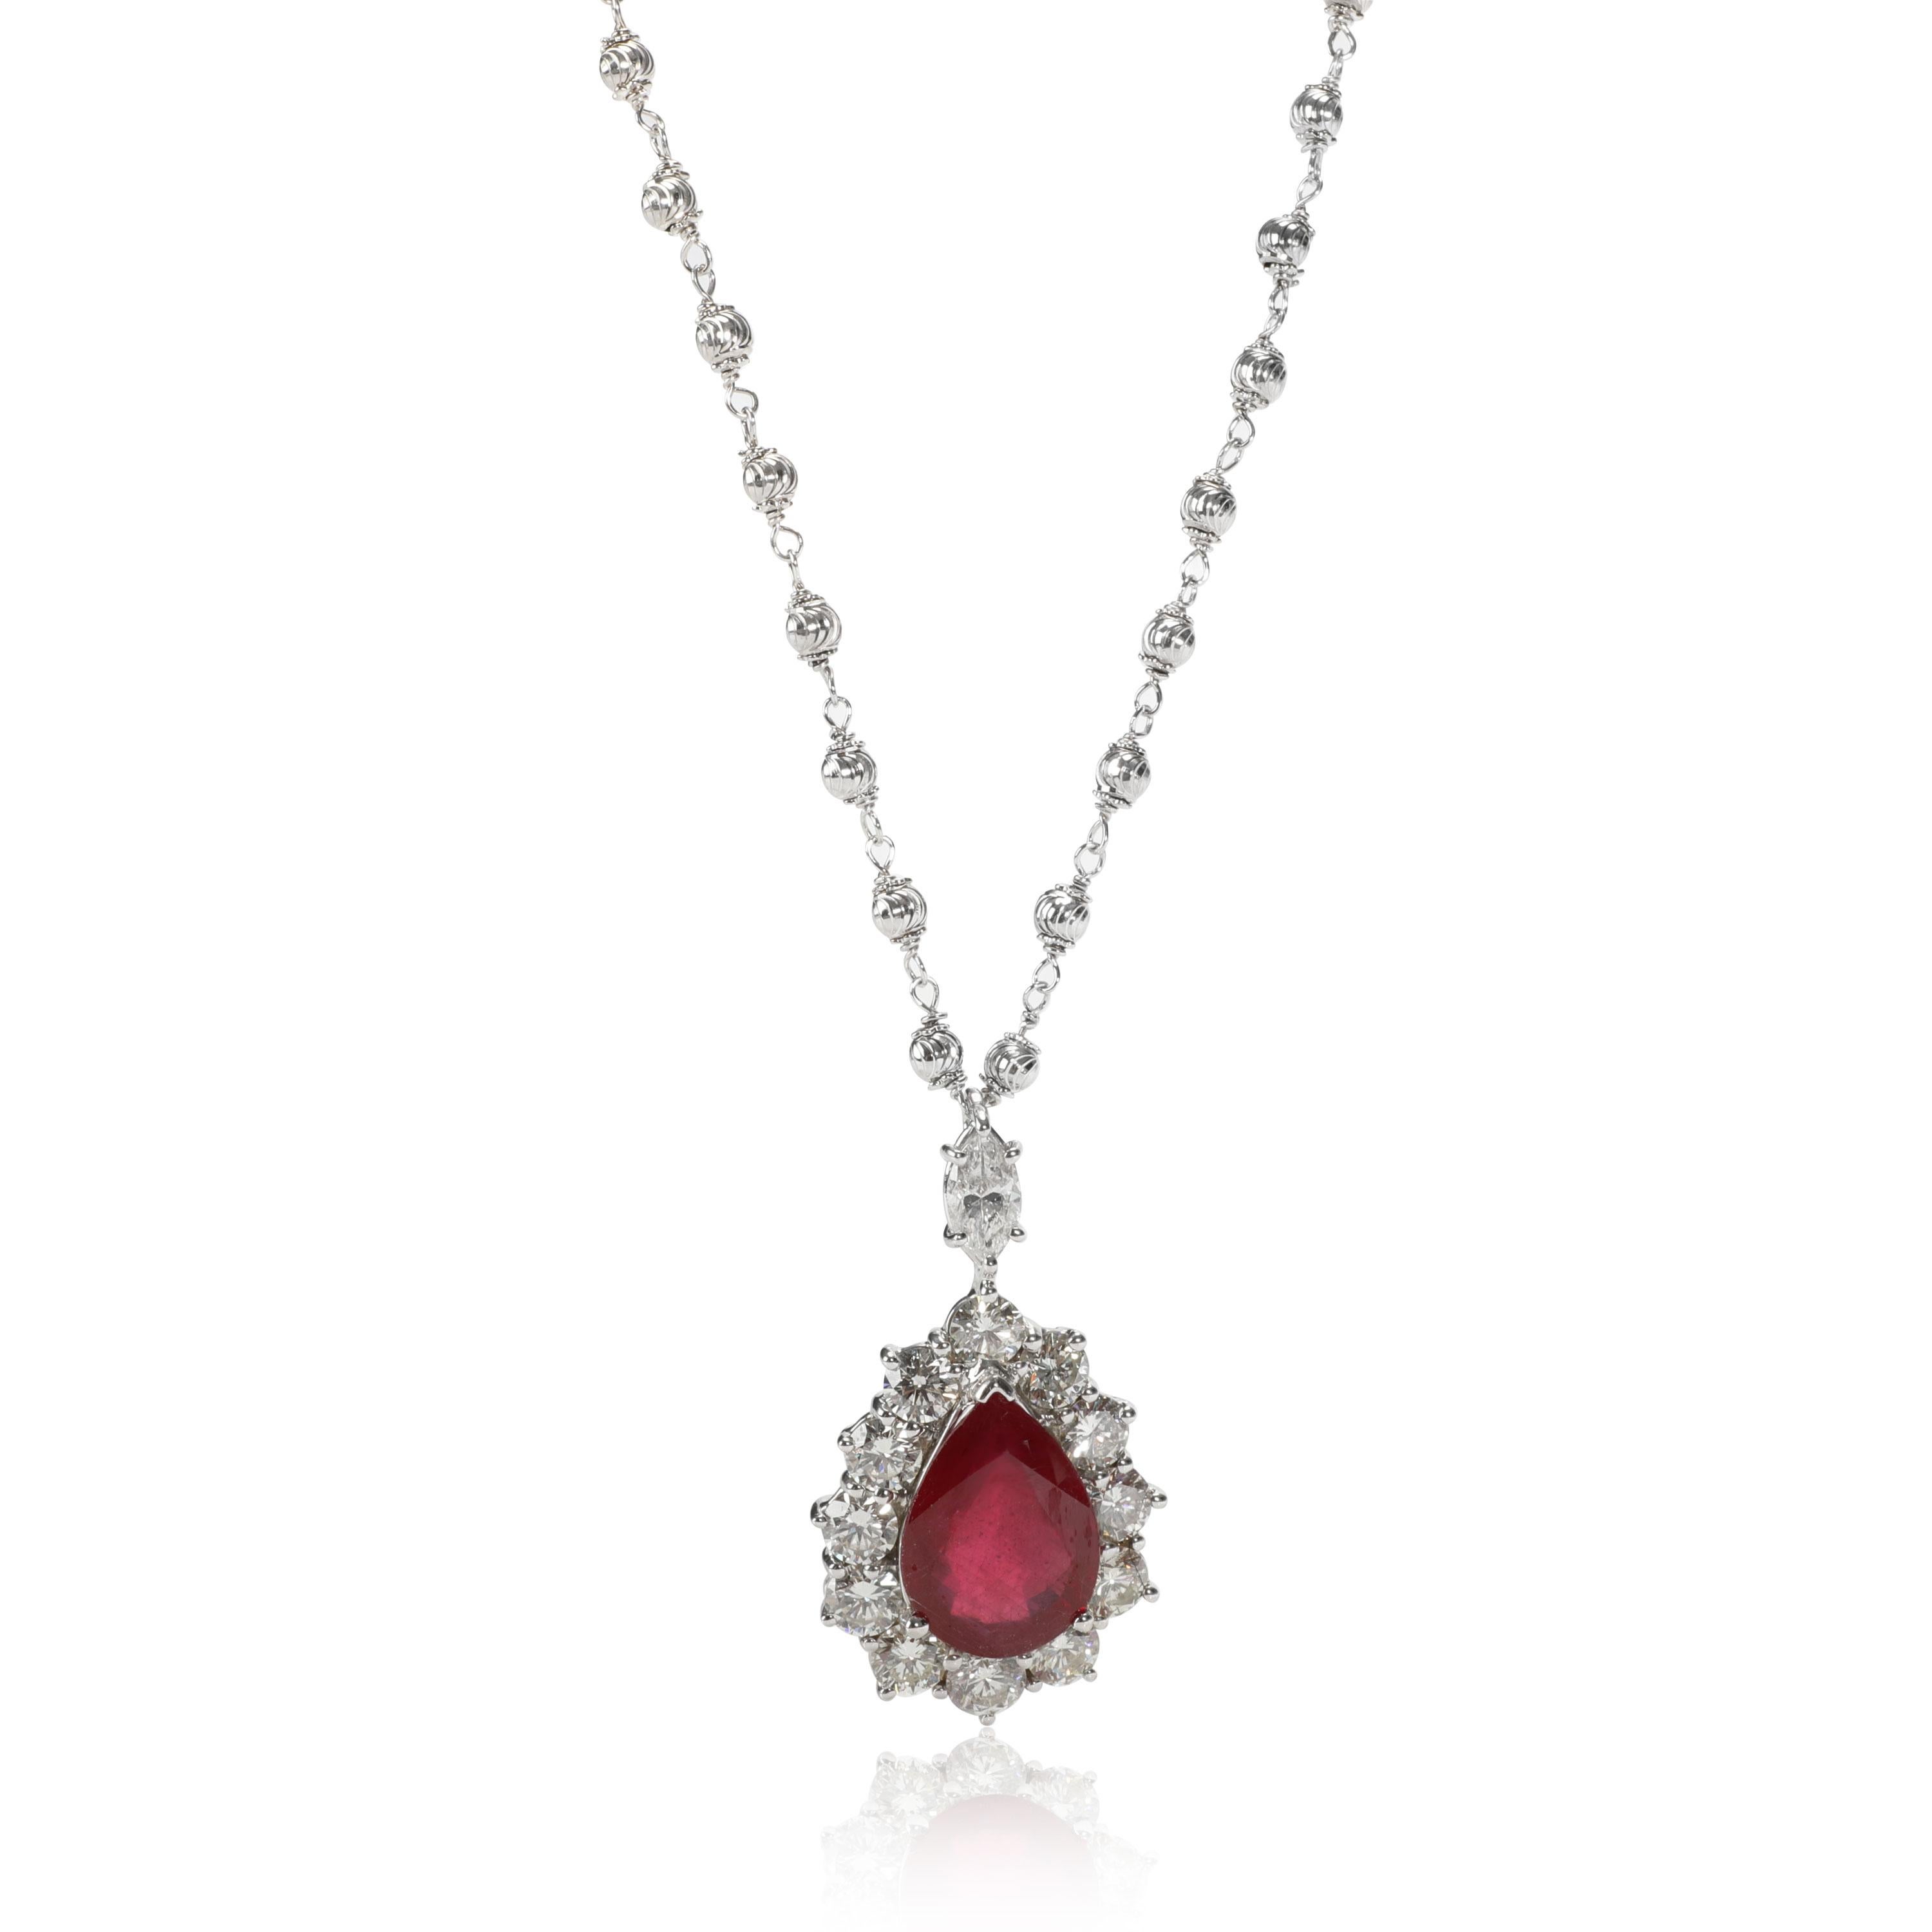 Women's Diamond & Glass Filled Ruby Necklace in 18K White Gold 3.67 CTW